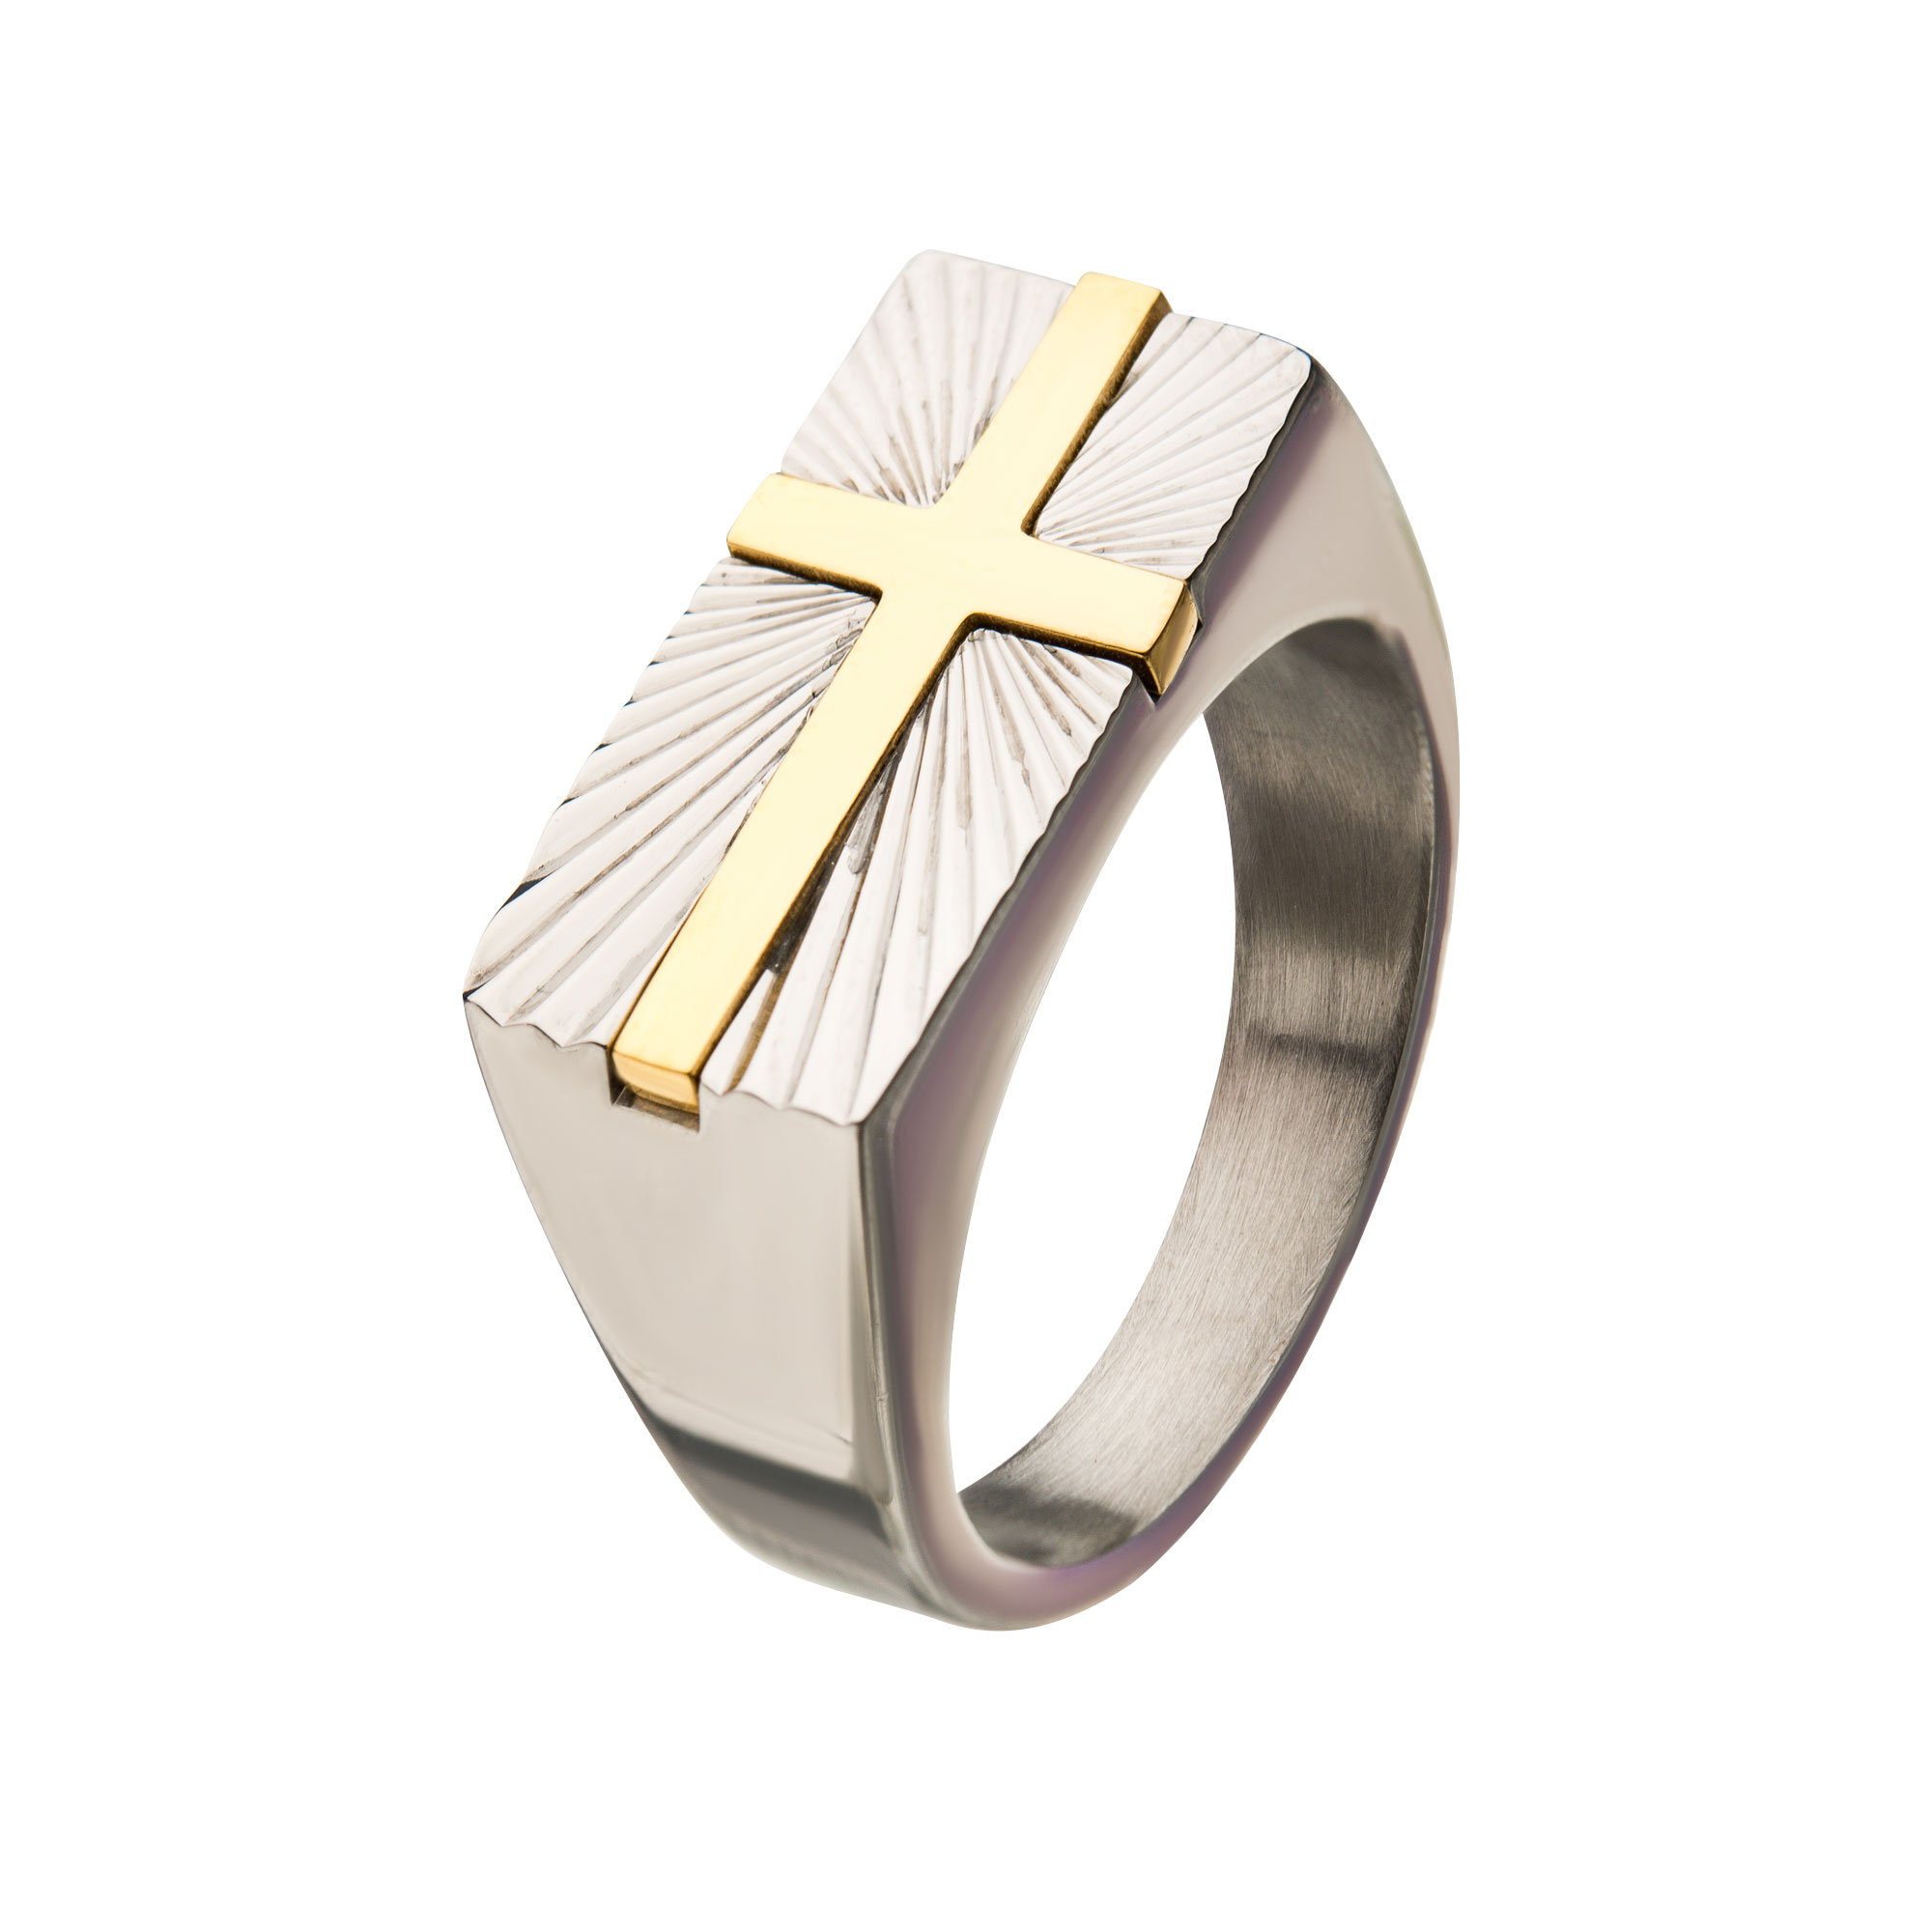 Stainless Steel with  Gold Plated Transfiguration Cross Ring Carroll / Ochs Jewelers Monroe, MI